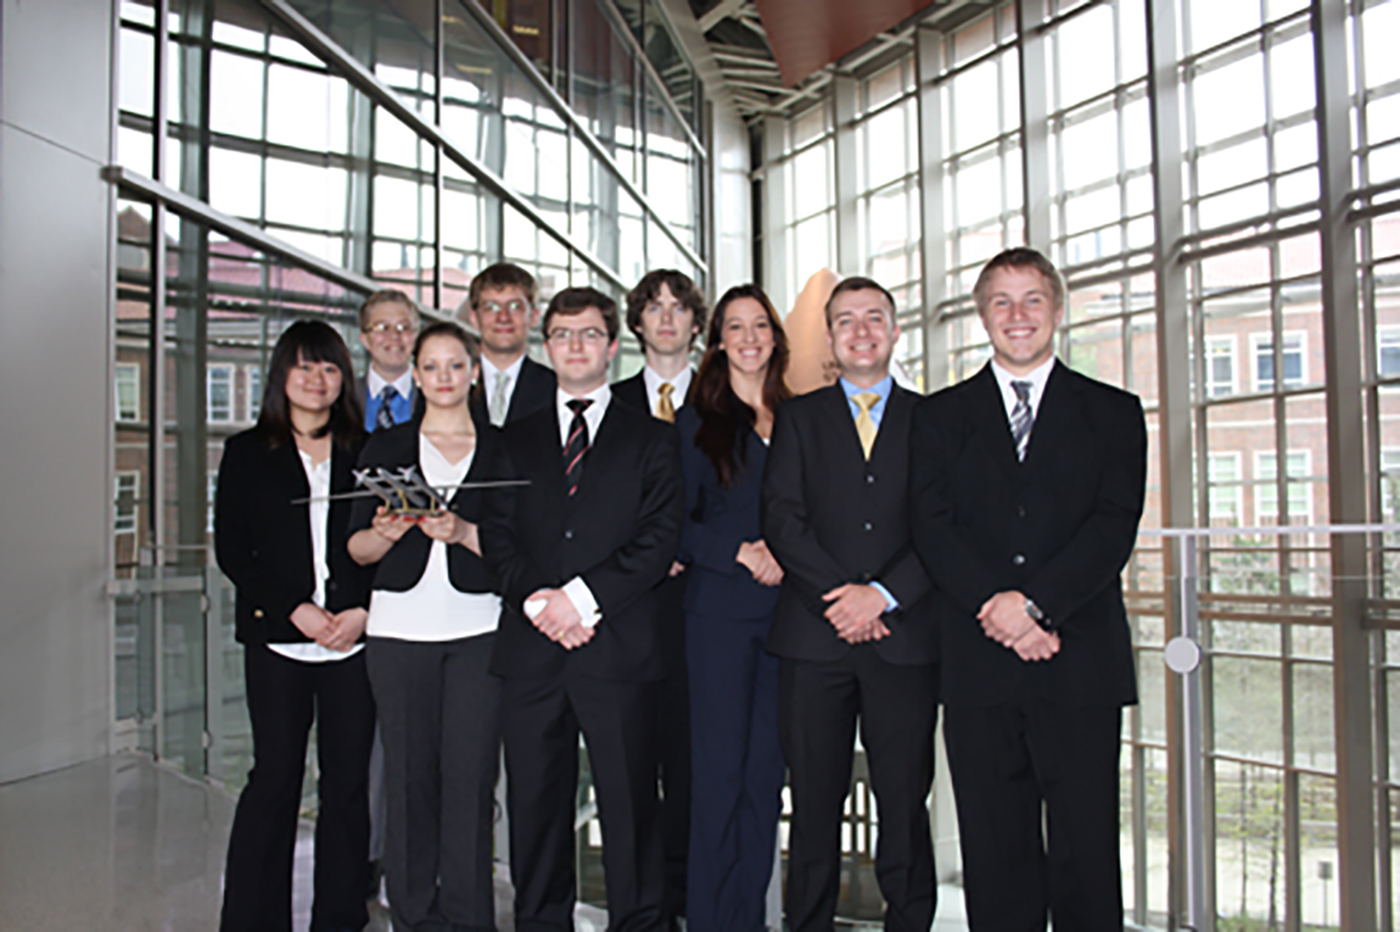 Group photo of the 2nd place 2014 design challenge winners from Purdue University.